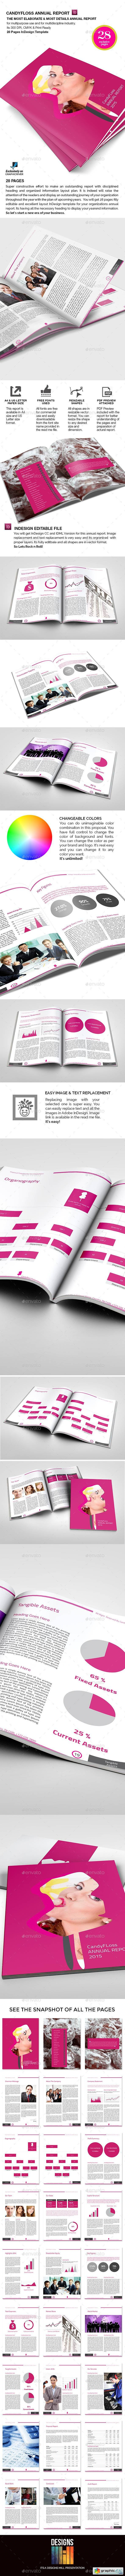 Candyfloss Annual Report